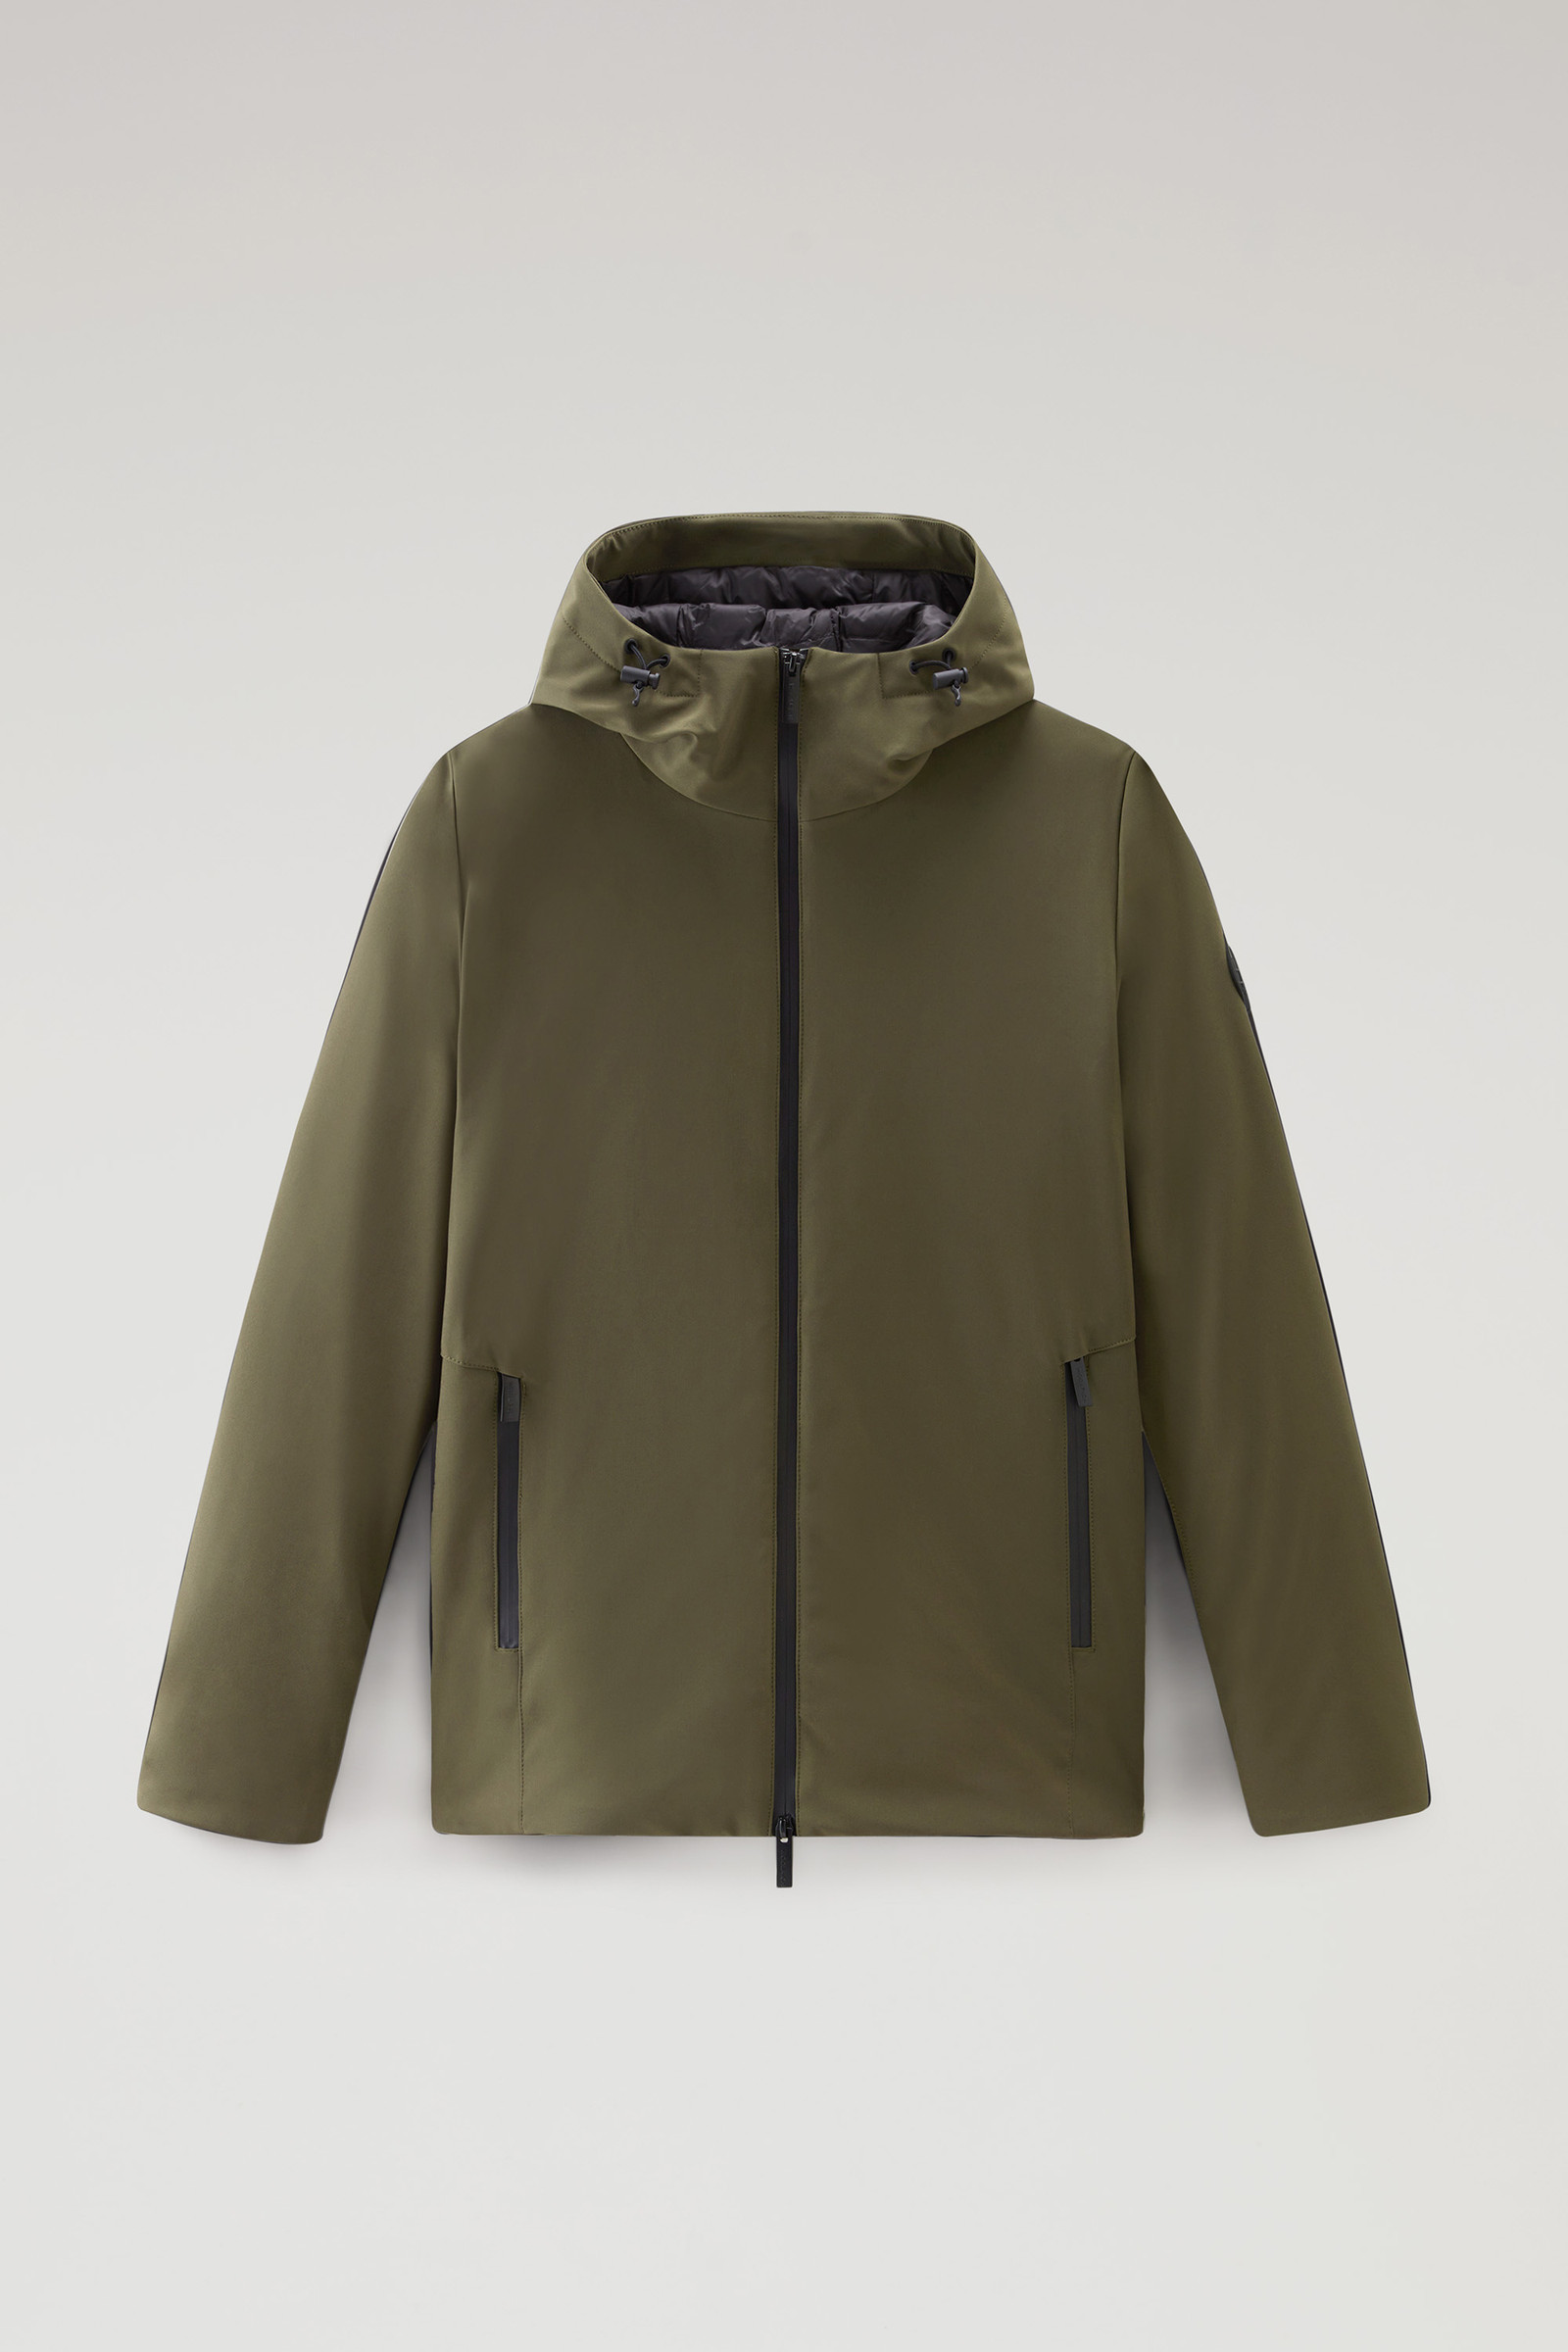 Men's Pacific Jacket in Tech Softshell Green | Woolrich USA